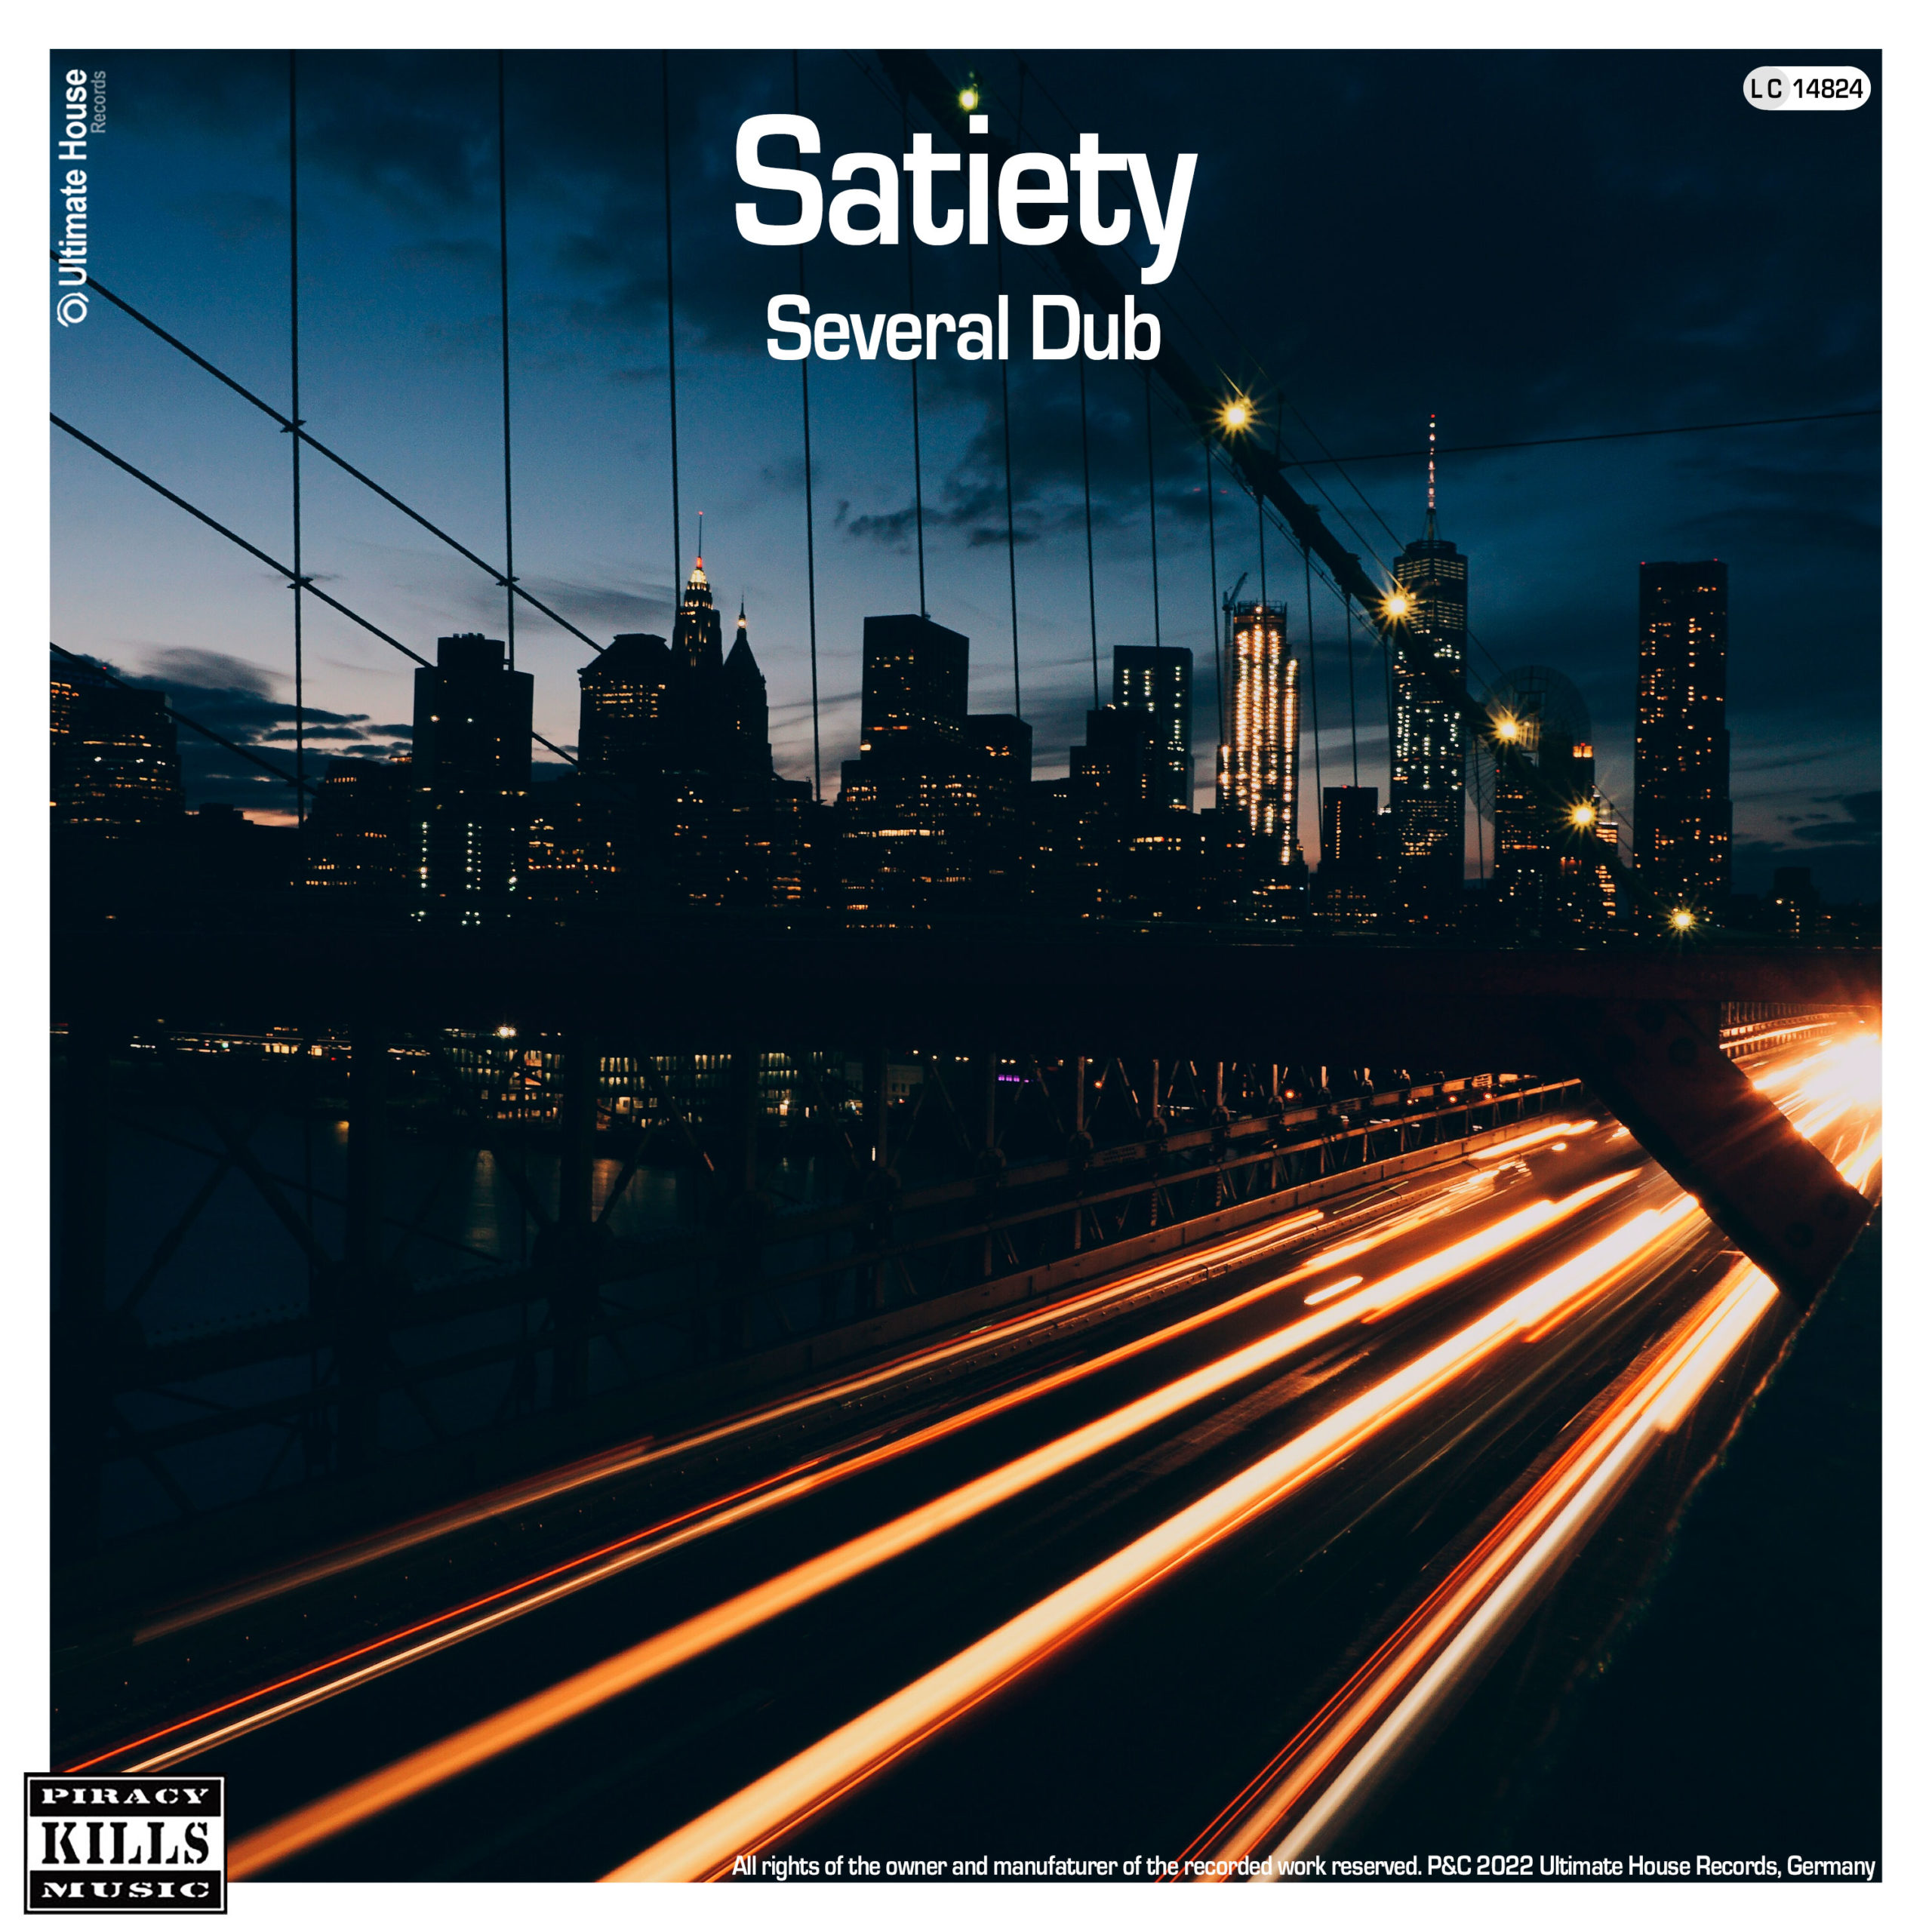 https://www.ultimate-house-records.com/wp-content/uploads/2022/01/155-Satiety-Cover_3000px_web-scaled.jpg